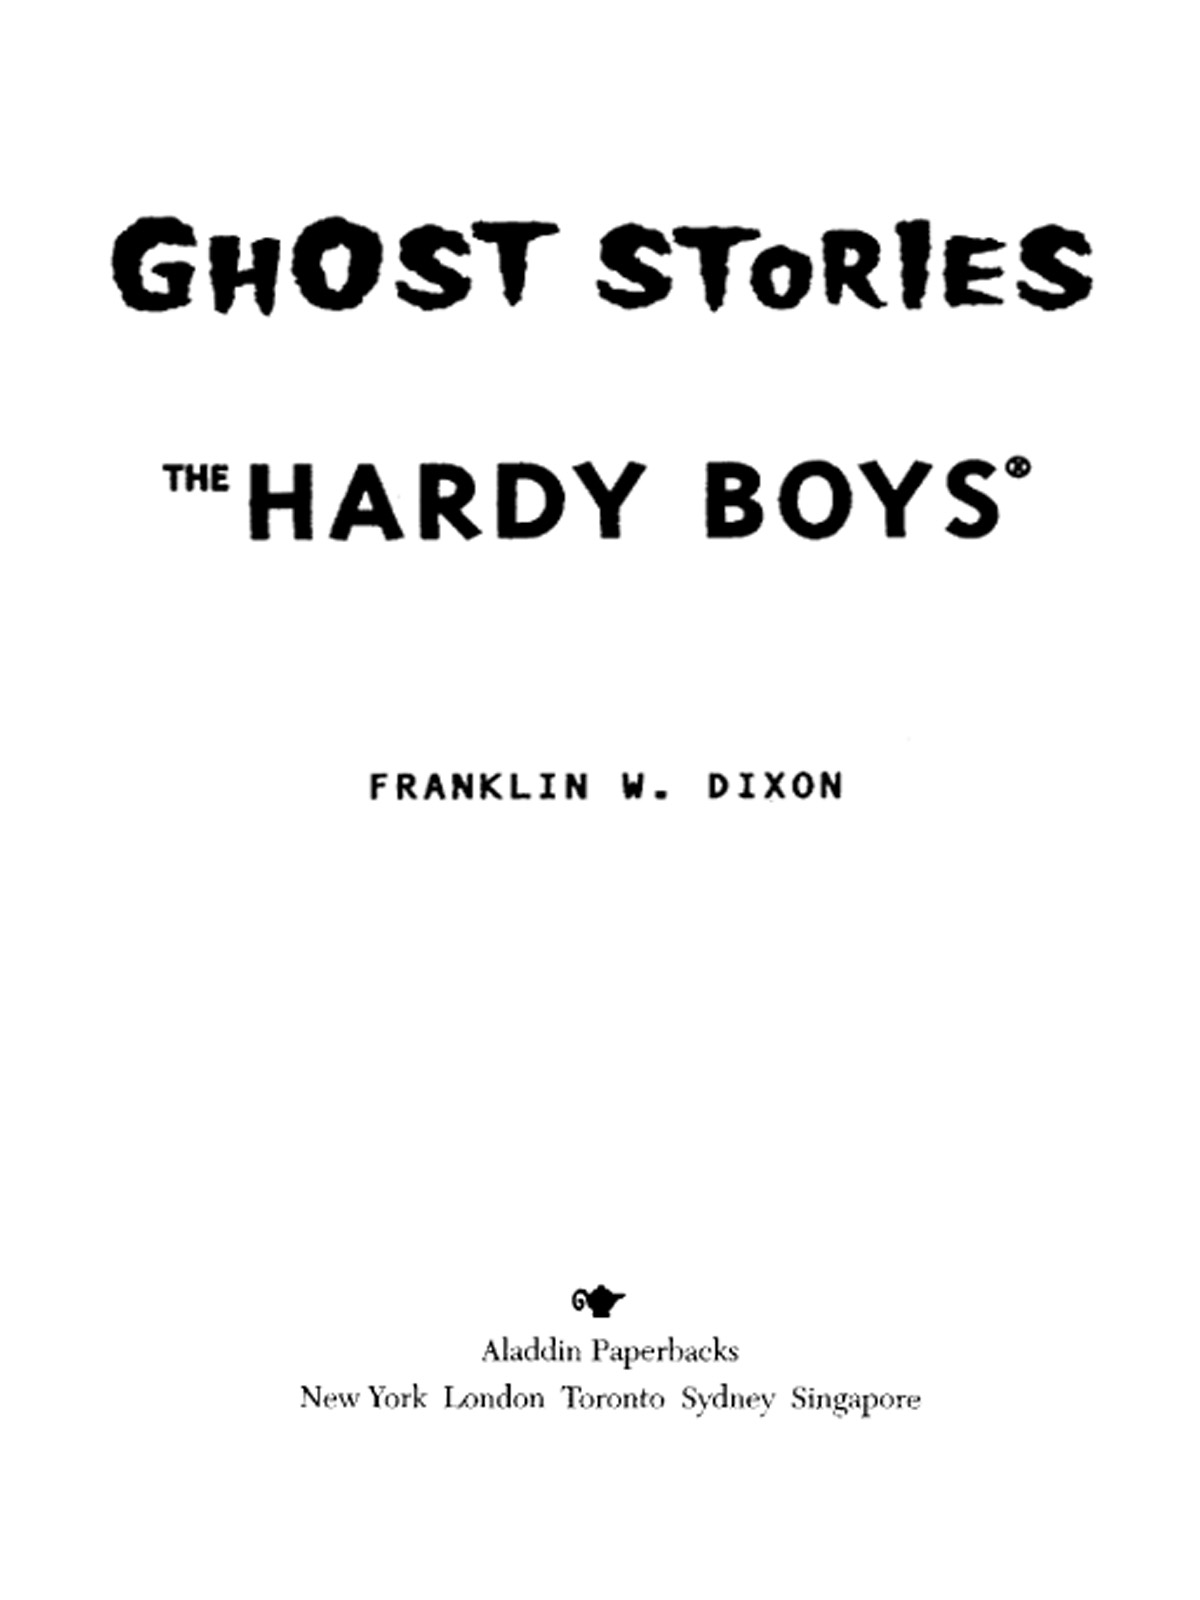 Ghost Stories (1984) by Franklin W. Dixon